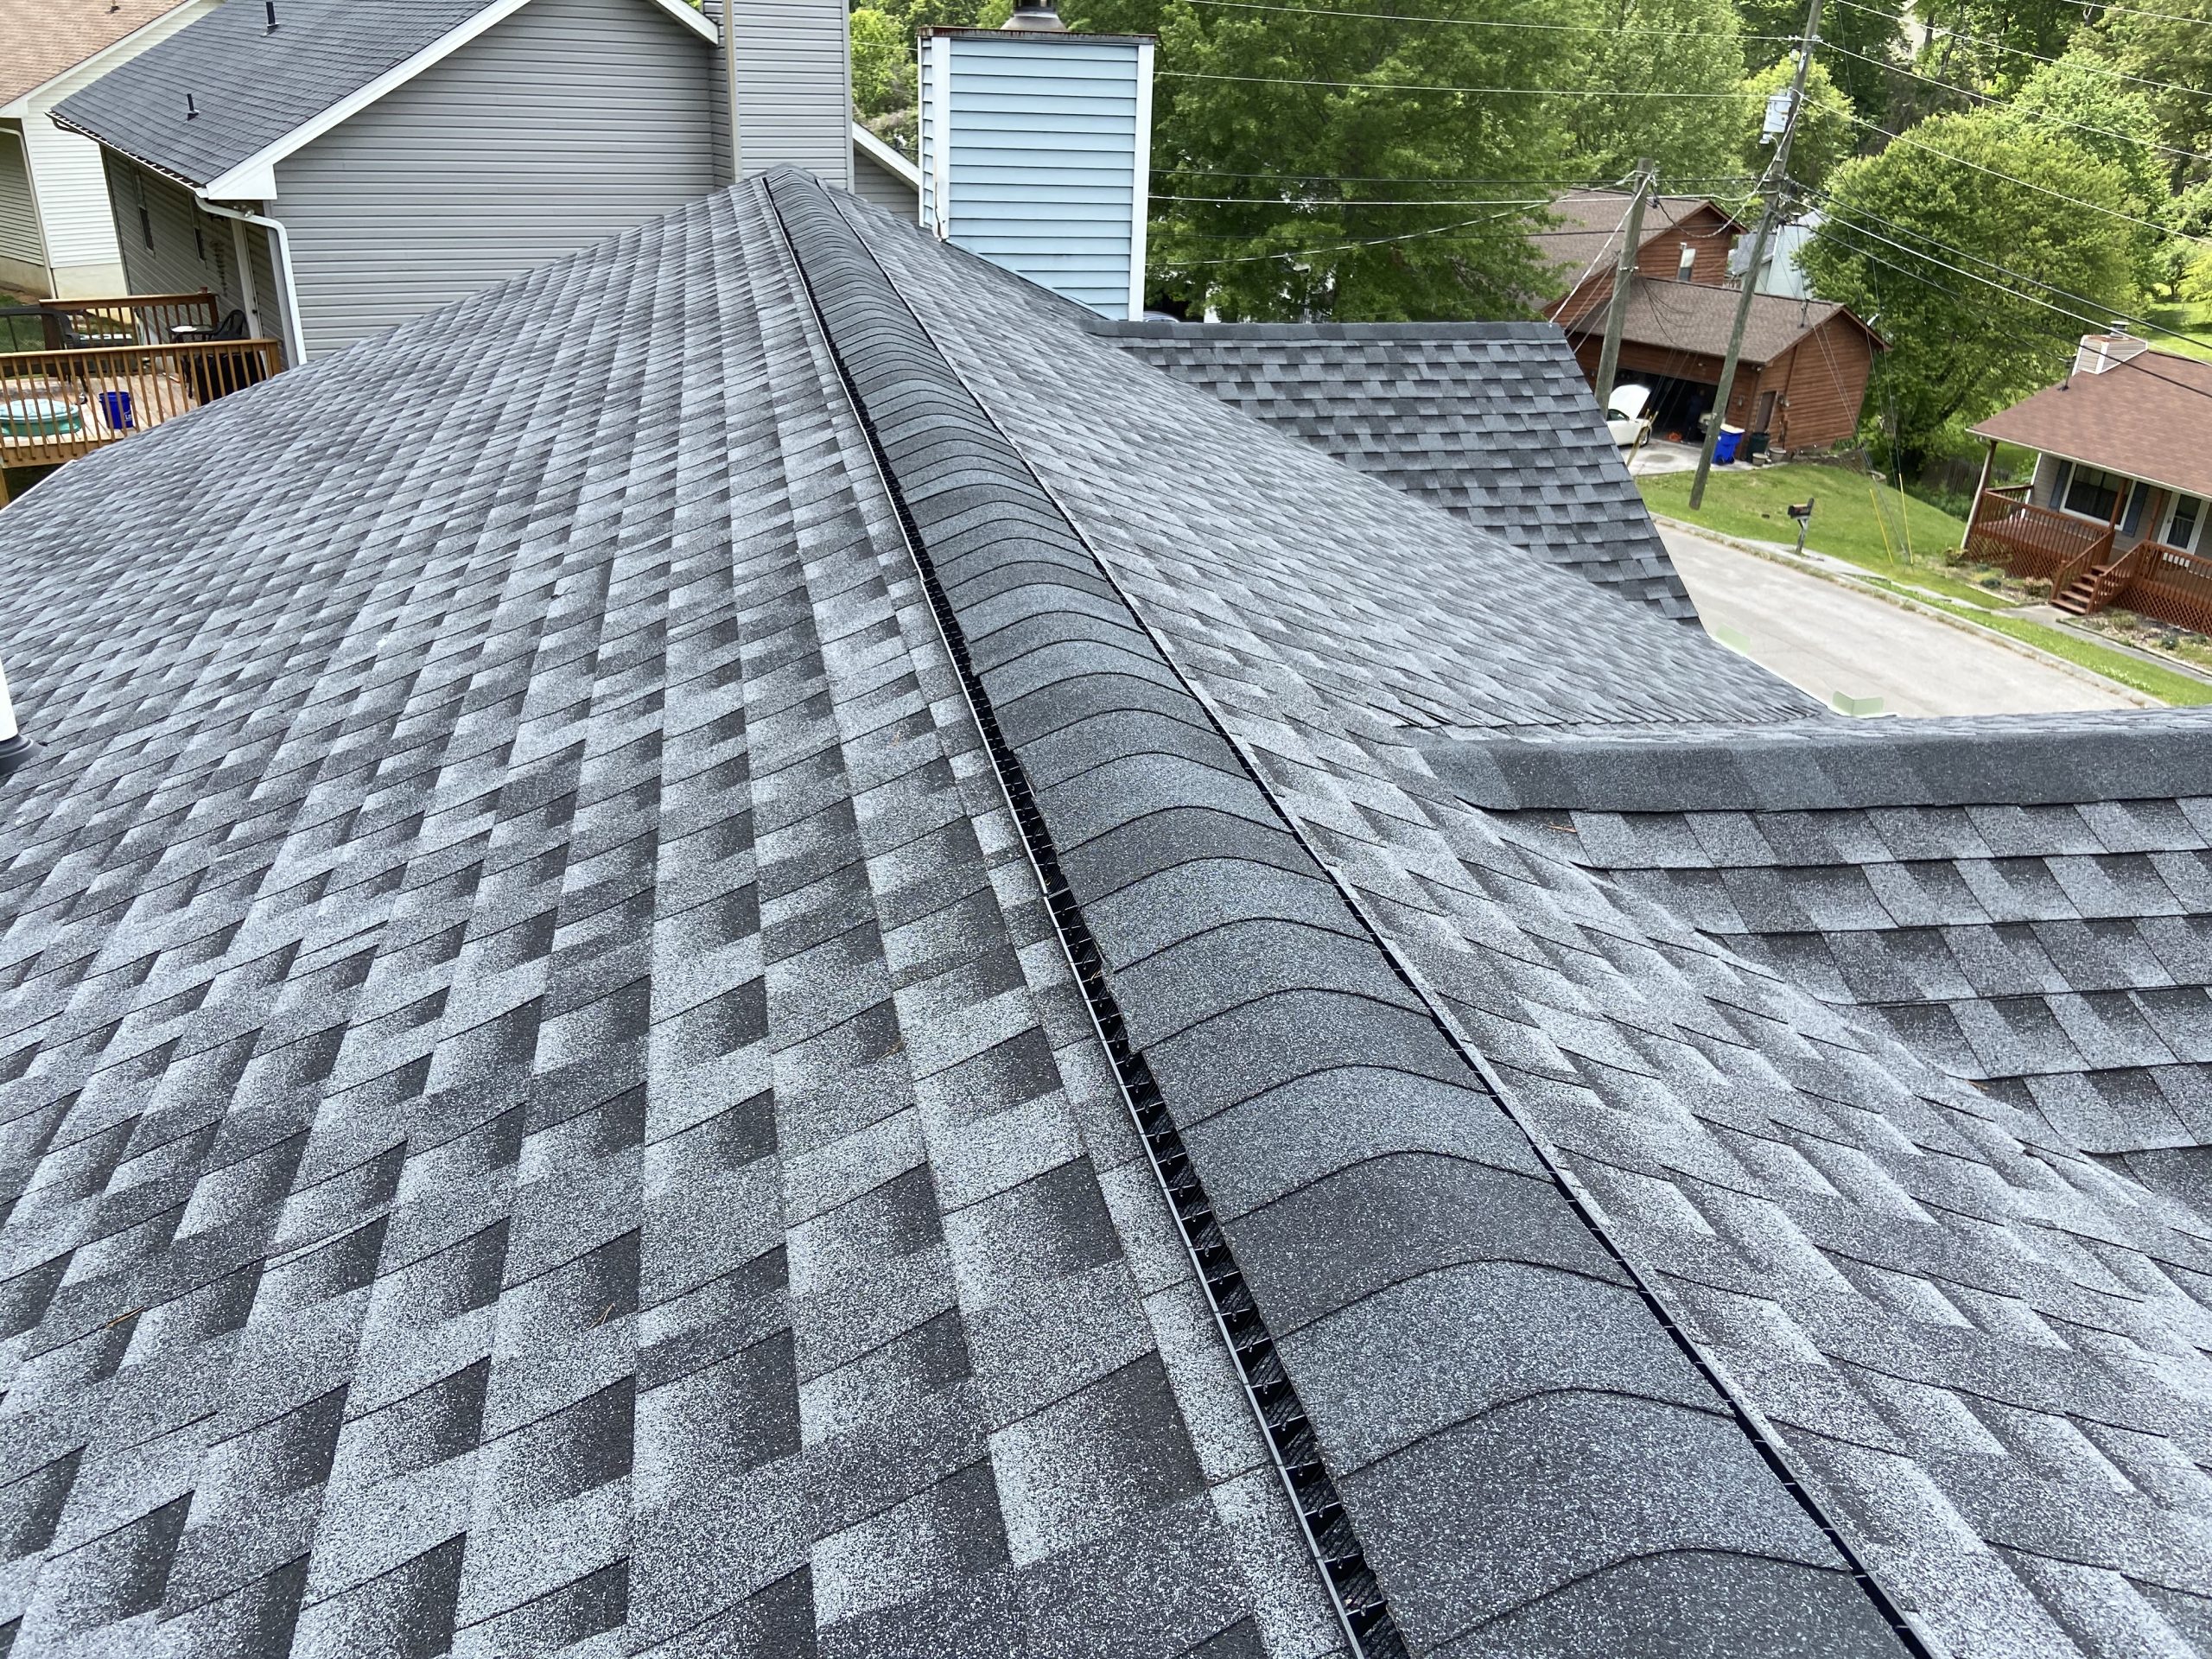 This is a view of the ridge of the roof with ridge cap shingles. 